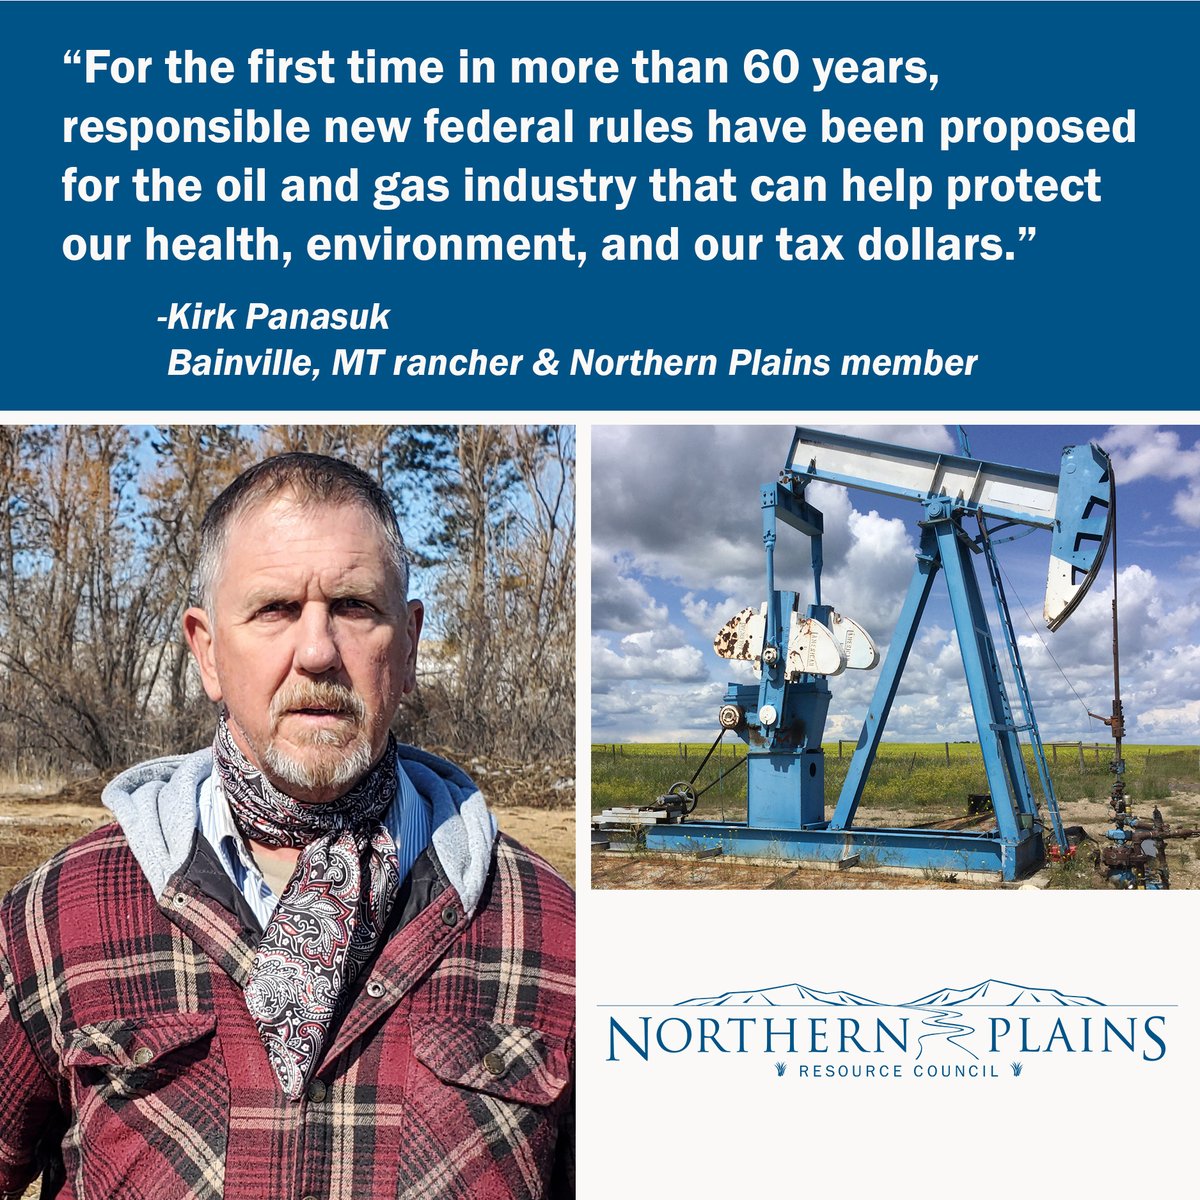 Kirk Panasuk ranches near MT's Bakken oilfields & he's seen oil companies abandon wells after drilling. Bonding levels are so low, companies just forfeit them, leaving a mess behind for communities and taxpayers. Support updated #oilandgas bonding reforms! NorthernPlains.org/Support-Bondin…